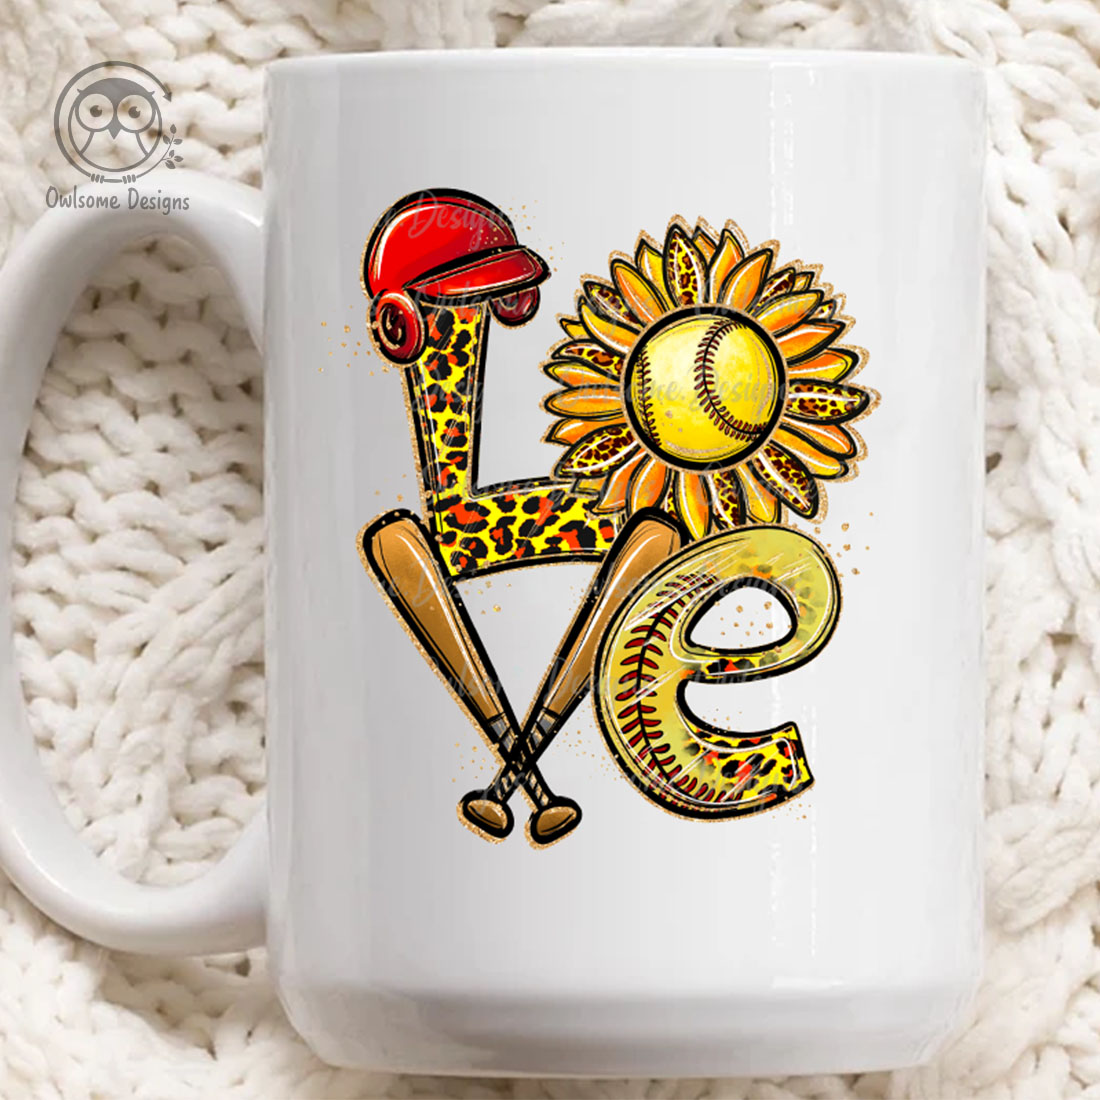 Image of a white cup with a unique inscription Love with softball elements.